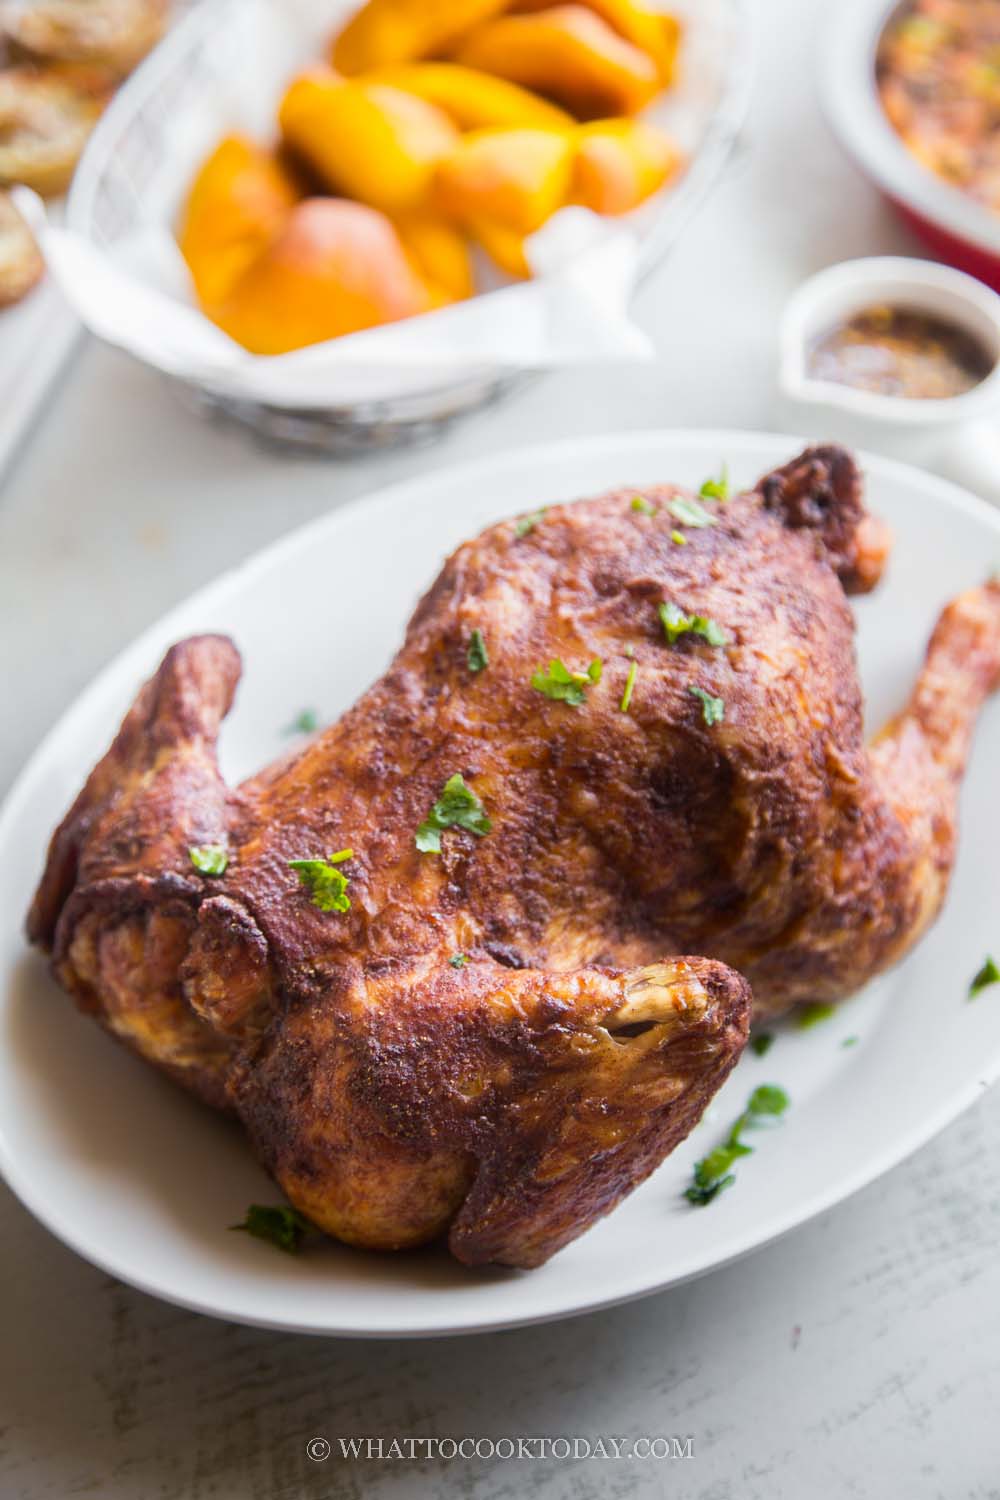 Five-Spice Oven-Roasted Chicken (Soy Sauce Brine)